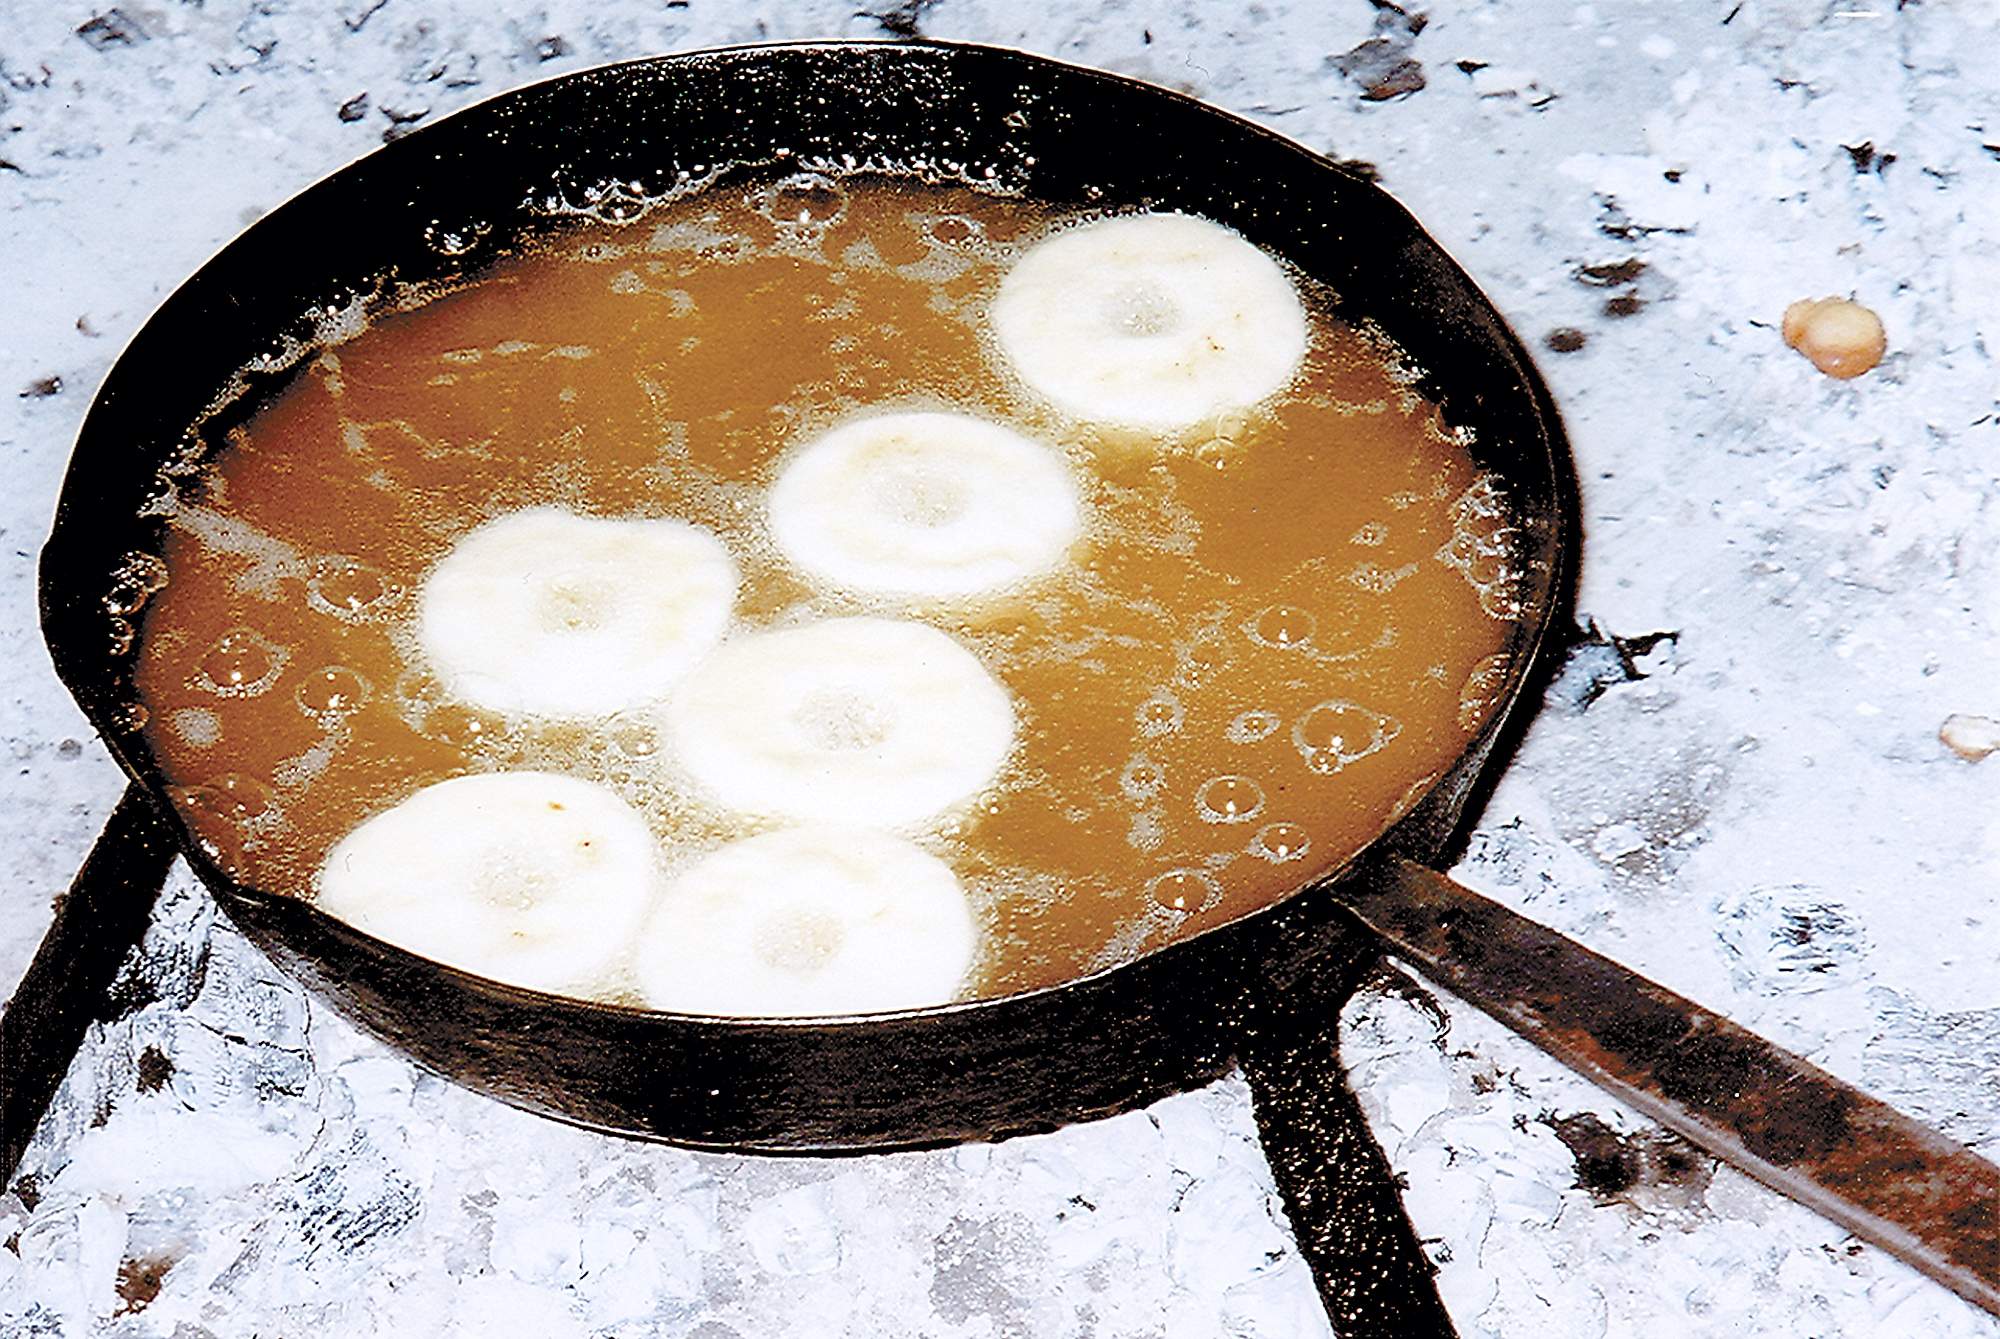 Hot cooking grease bubbles as fasnachts float to the top of the skillet during “Fasnacht Making Day” in 2006 at the Landis Valley Village & Farm Museum in Lancaster, Pennsylvania.